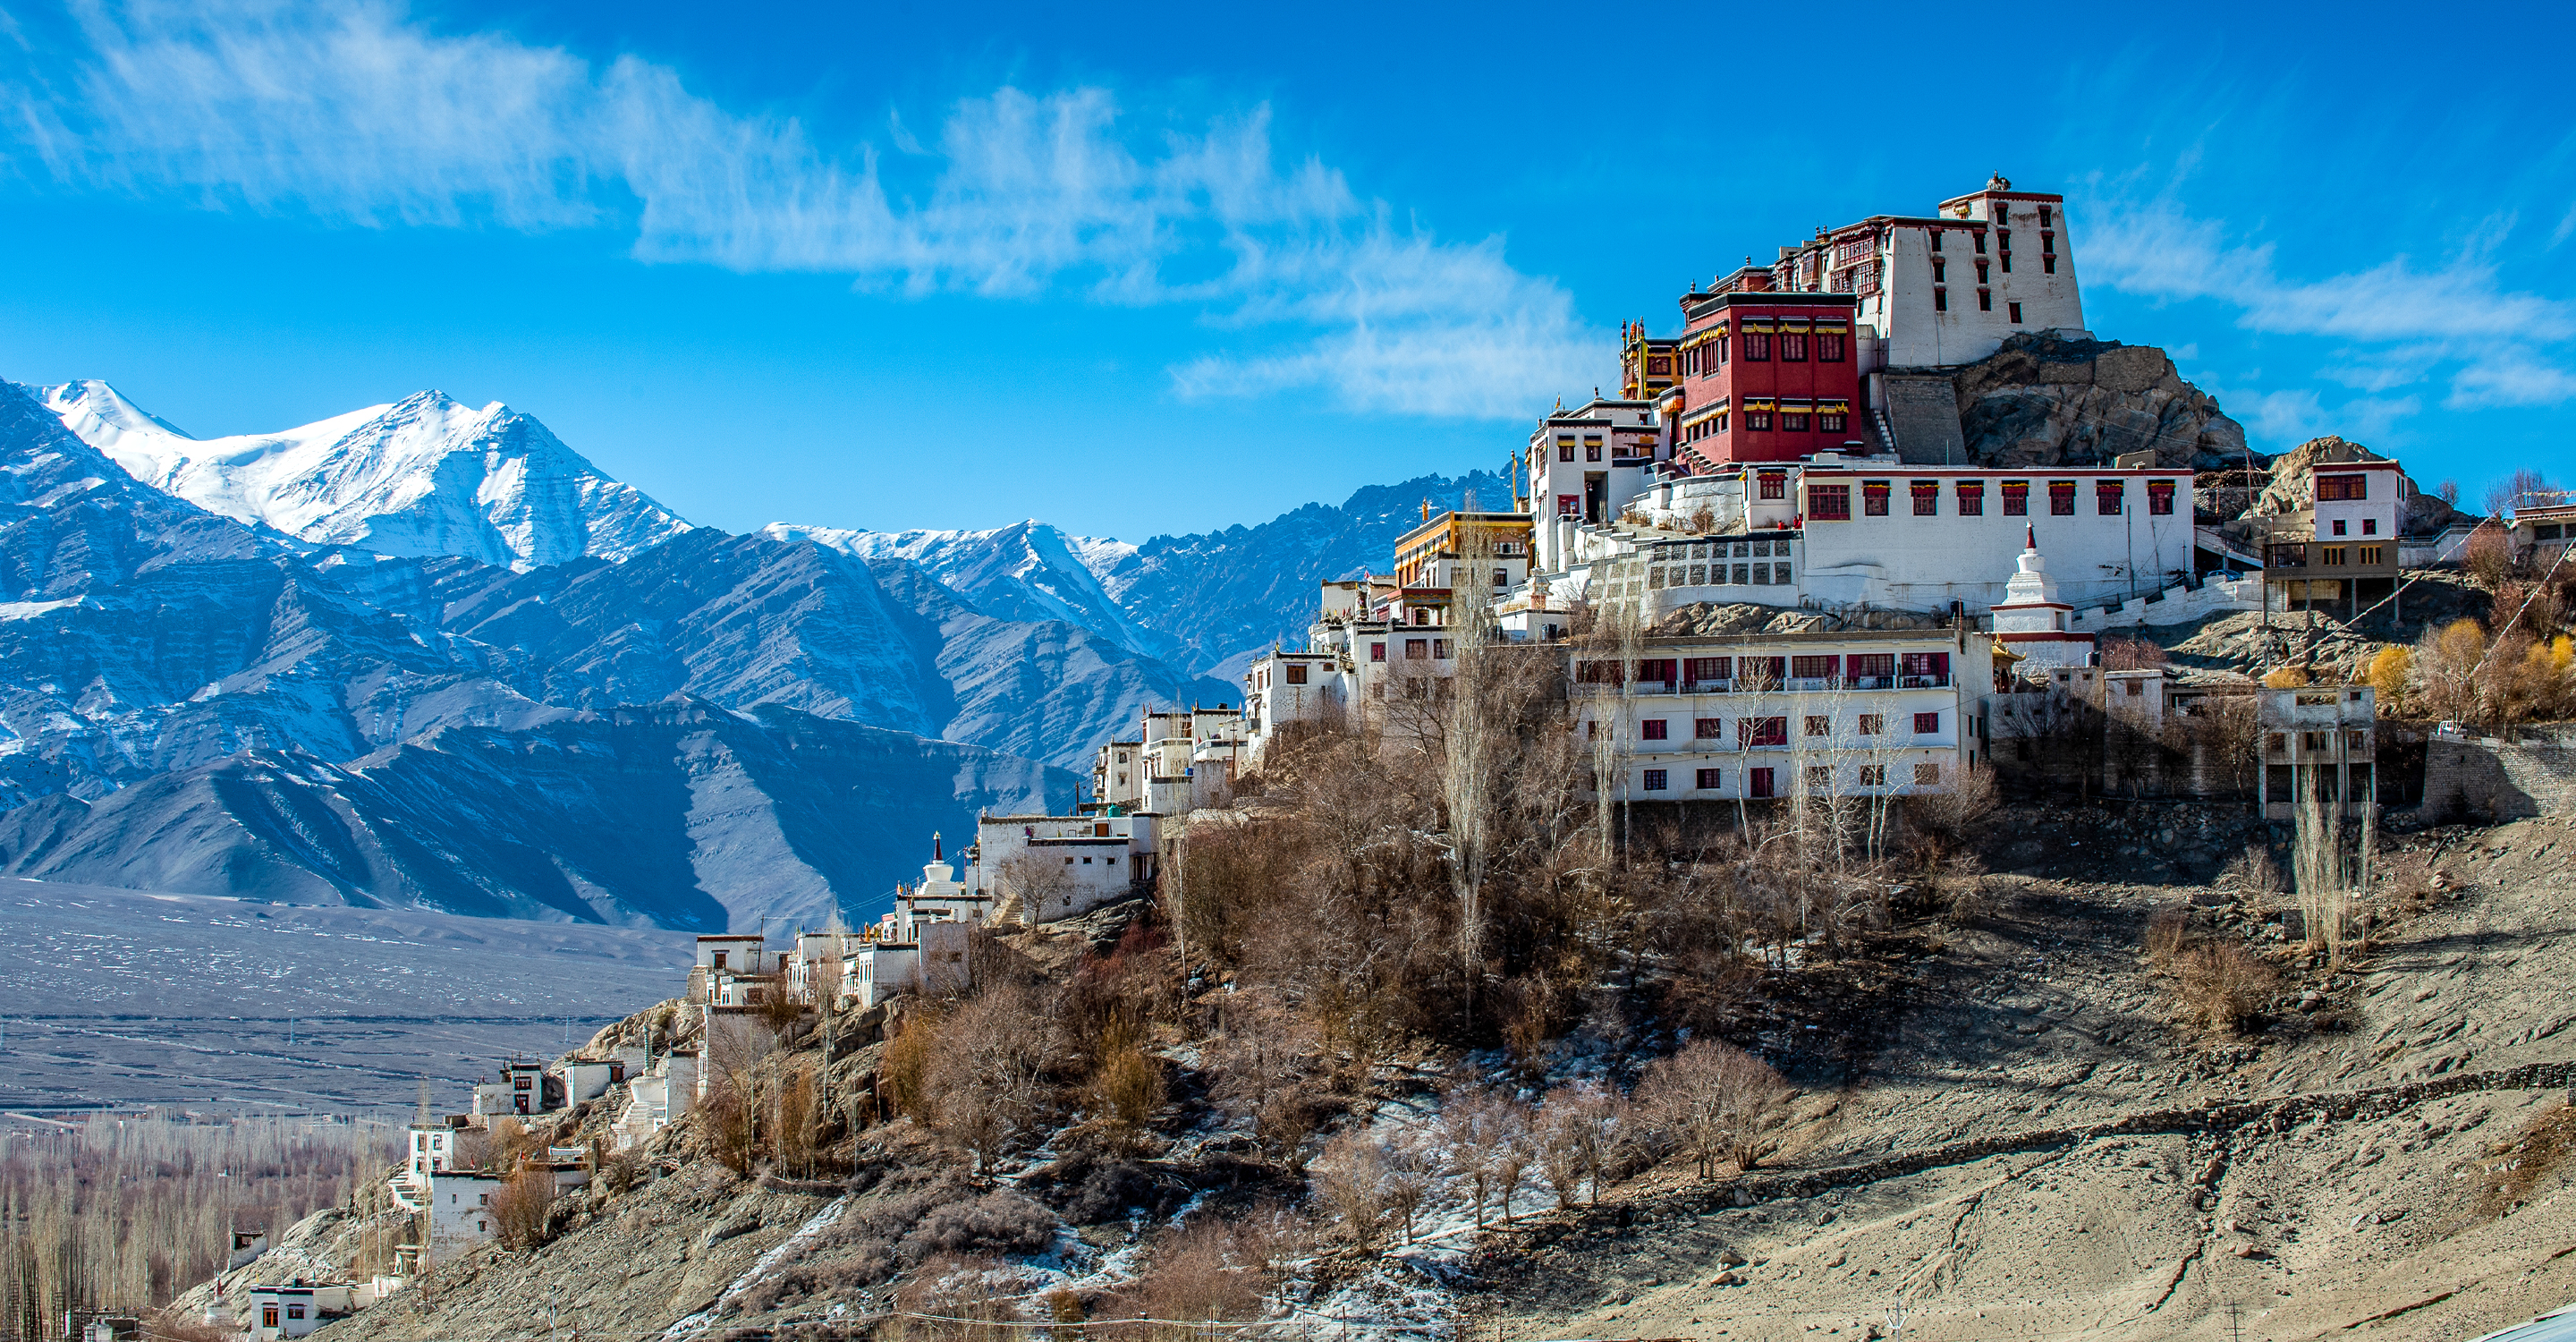 The Thiksey Monastery sits on a hillside among the Himalaya Mountains, Leh Ladakh, India